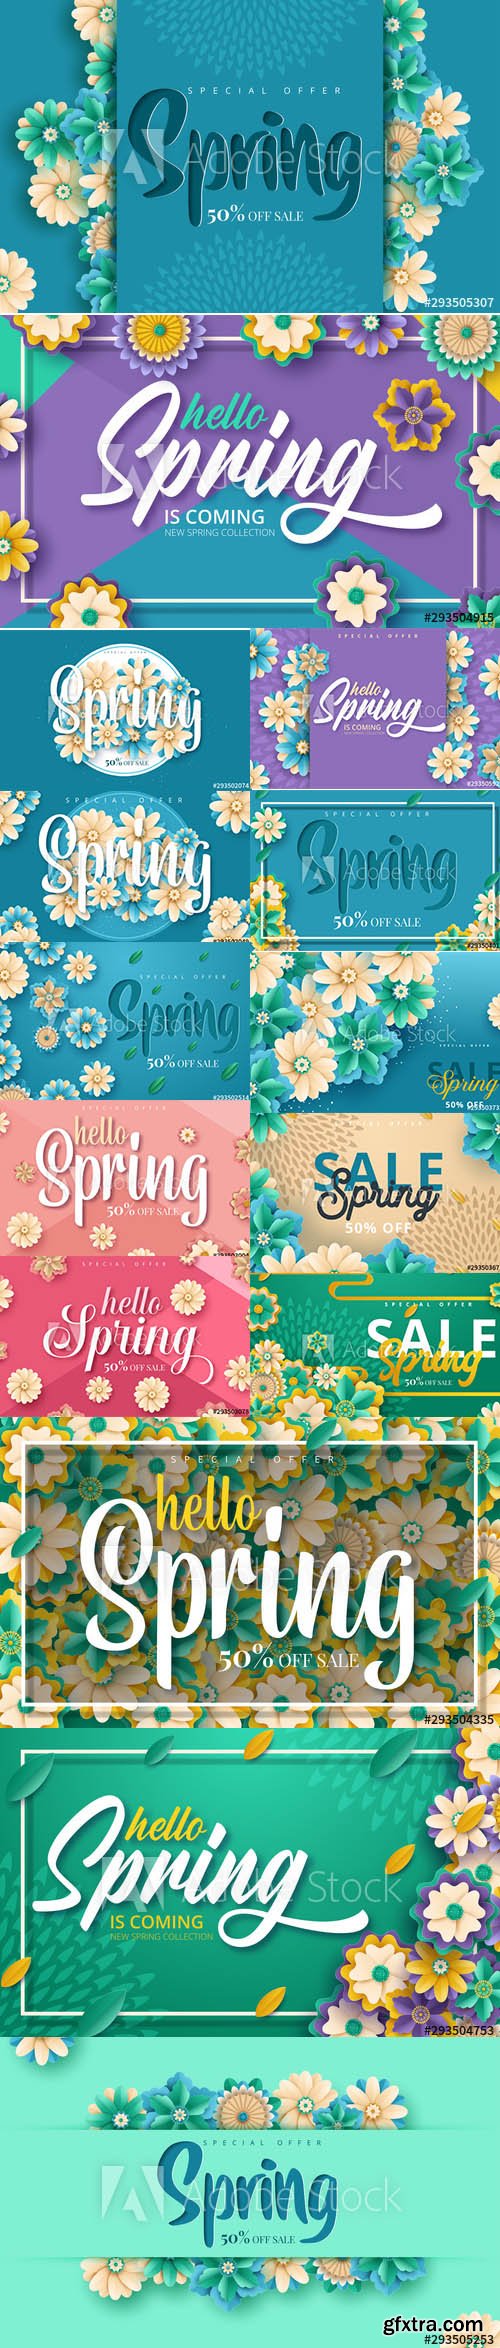 Set of Spring Sale Backgrounds with Flowers